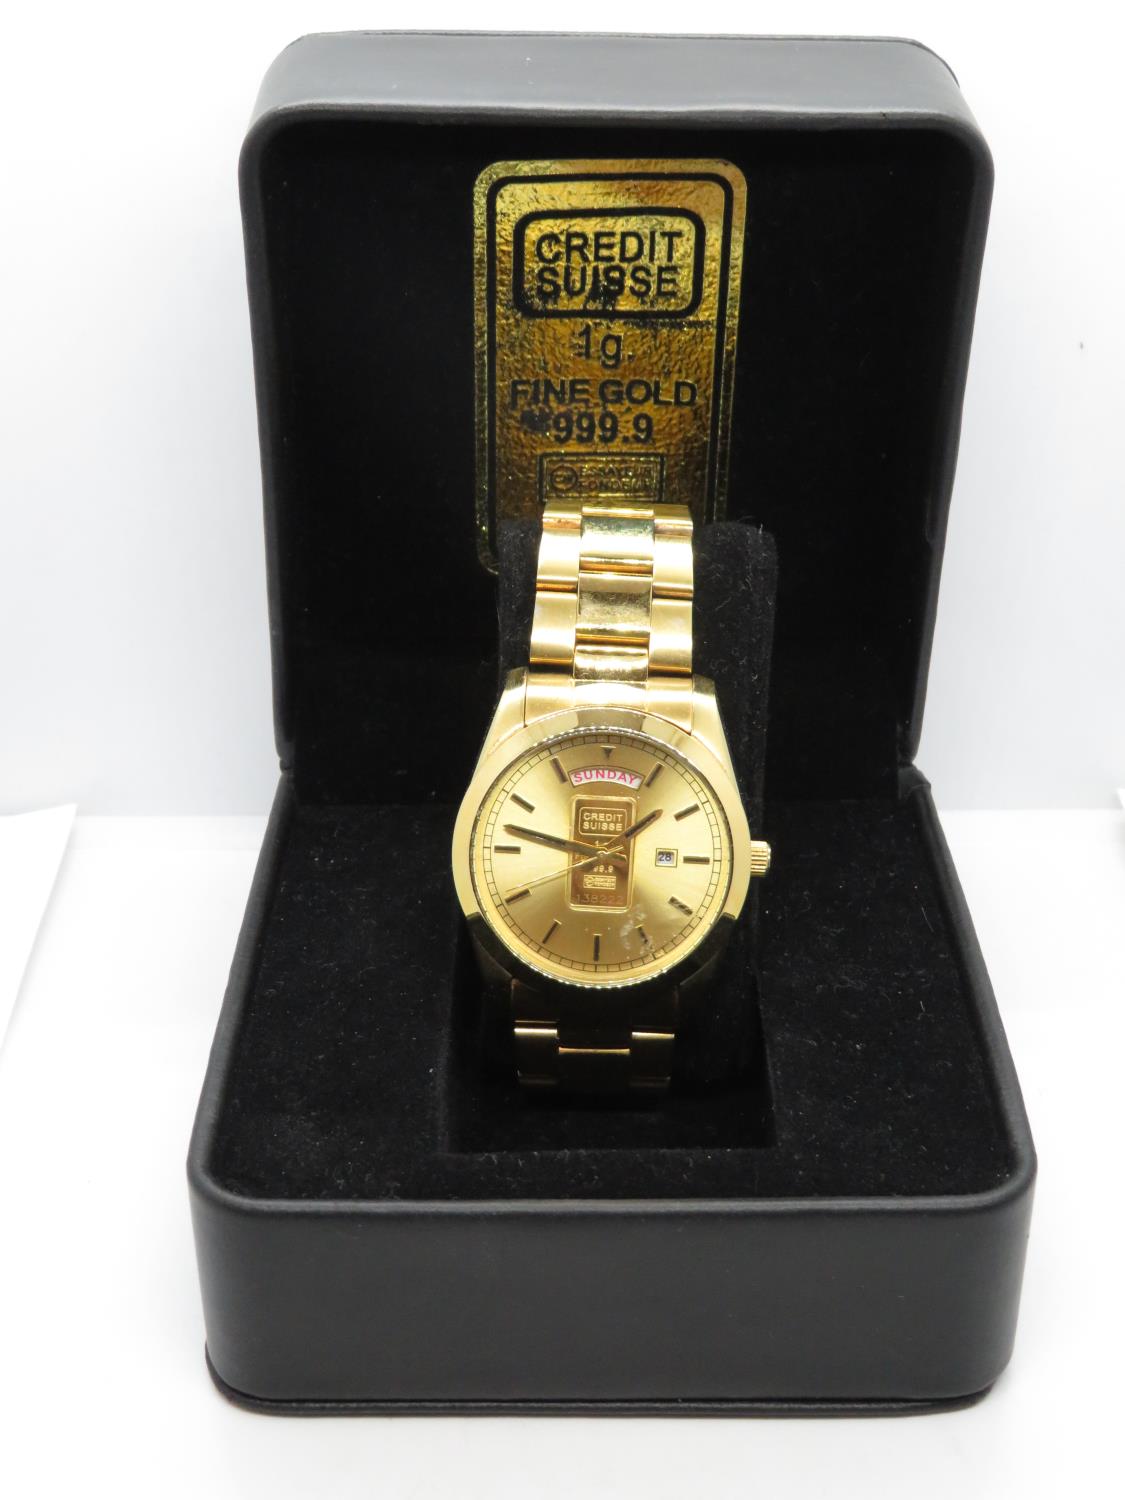 Working boxed Credit Suisse 1g fine gold displayed on face of watch